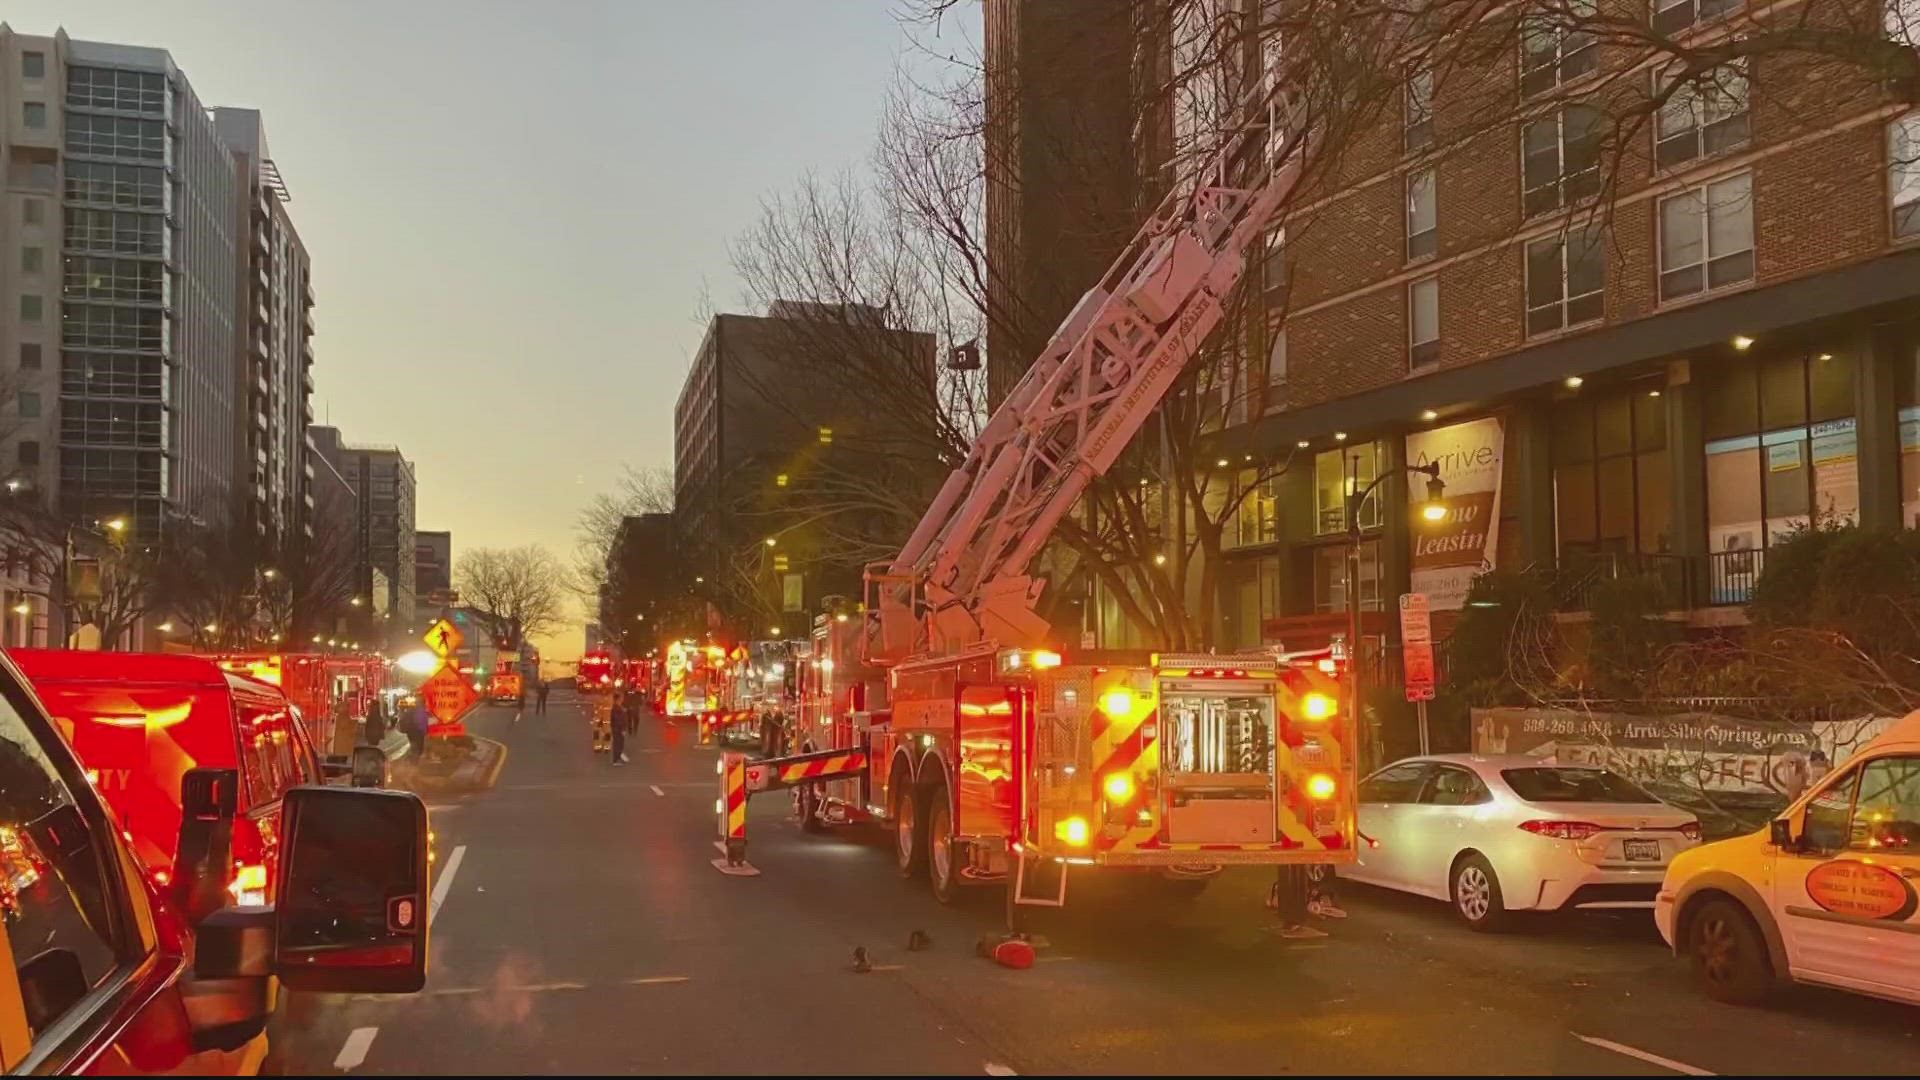 One woman died from the fire and 15 other people were hospitalized due to the fire in Downtown Silver Spring. Over 400 people have been displaced.